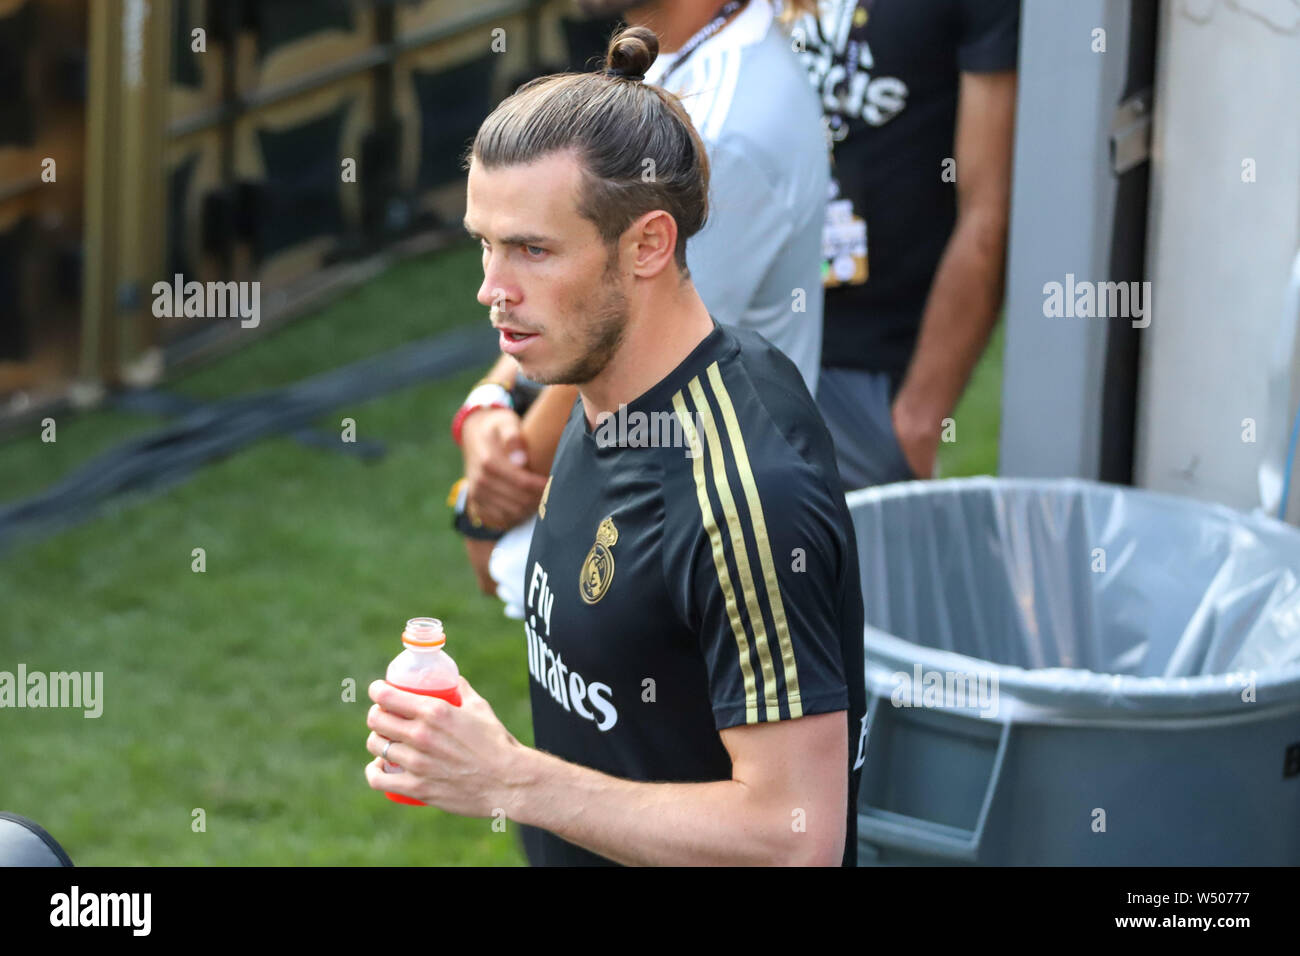 East Rutherford, United States. 25th July, 2019. Gareth Bale of Real Madrid during training at MetLife Stadium in the city of East Rutherford on Thursday, 25. The team faces Atletico Madrid tomorrow for the International Champions Cup. Credit: Brazil Photo Press/Alamy Live News Stock Photo